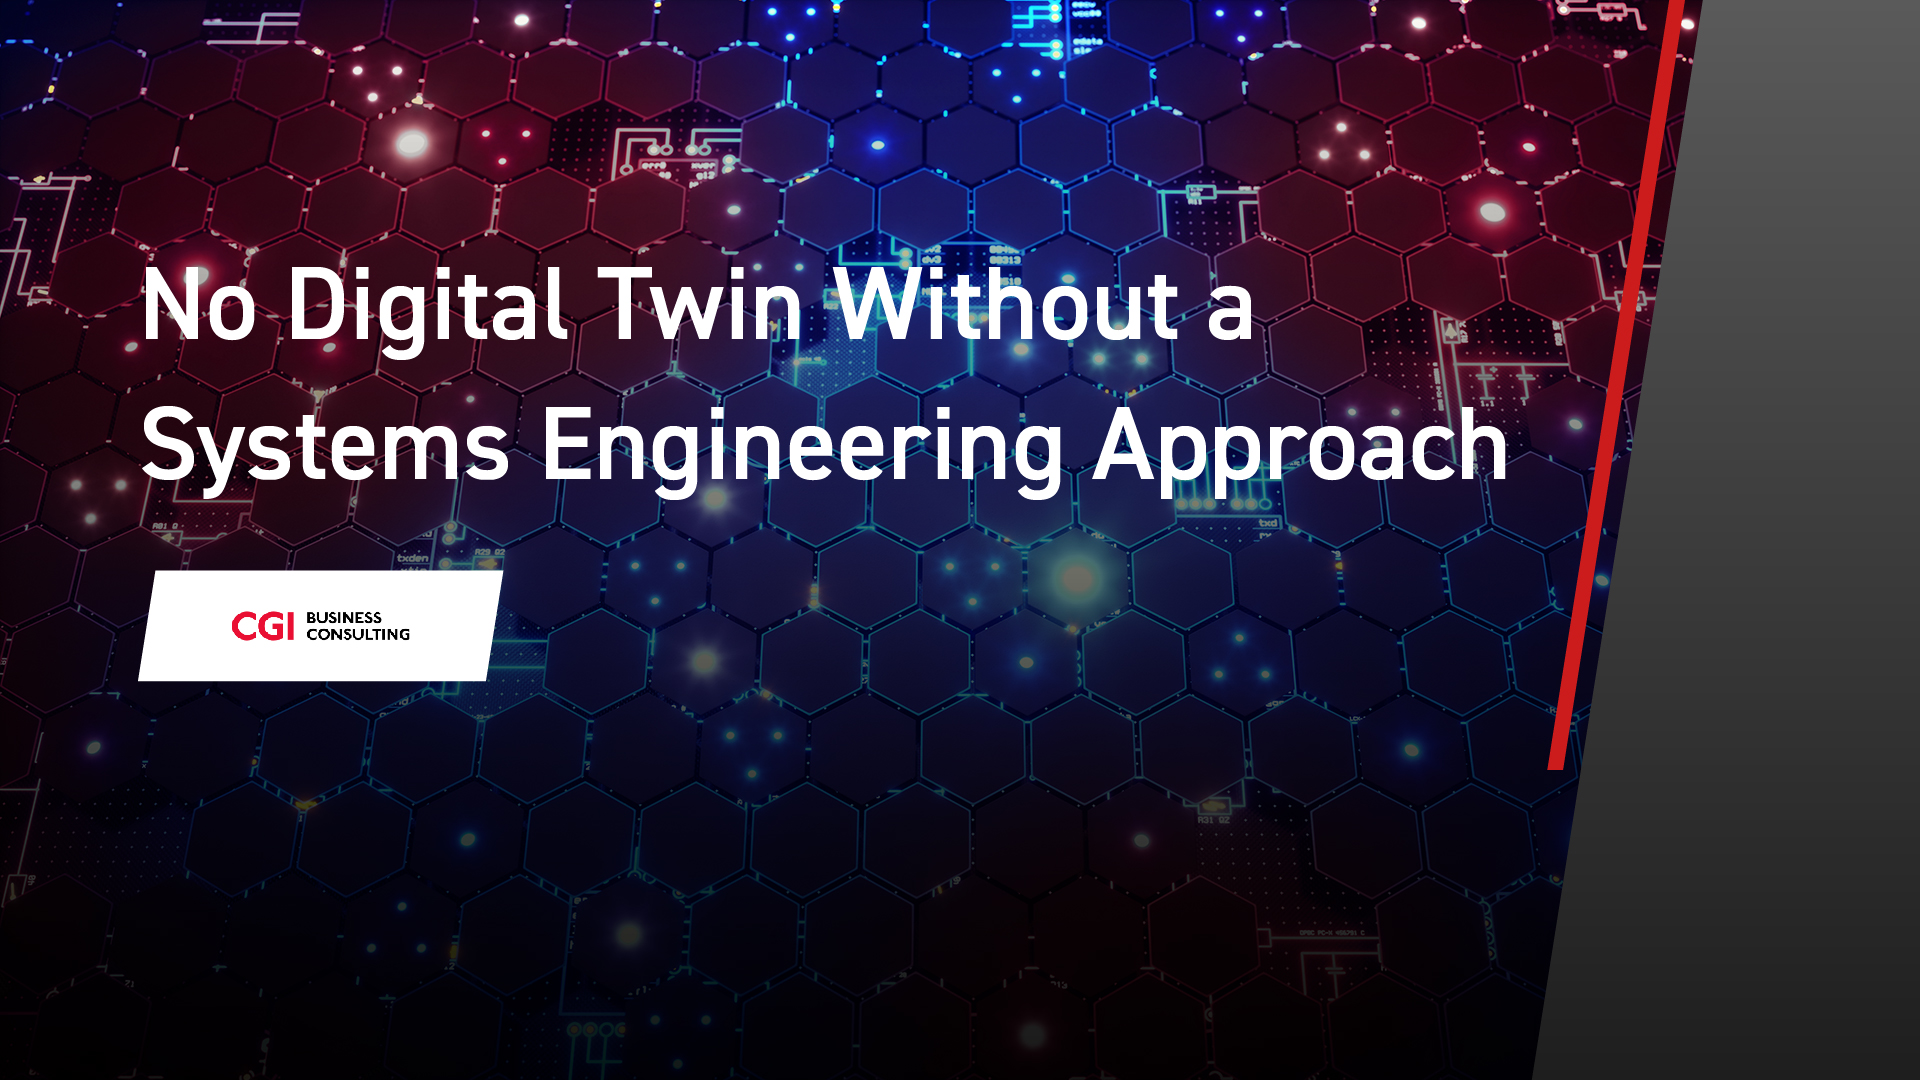 No Digital Twin Without a Systems Engineering Approach